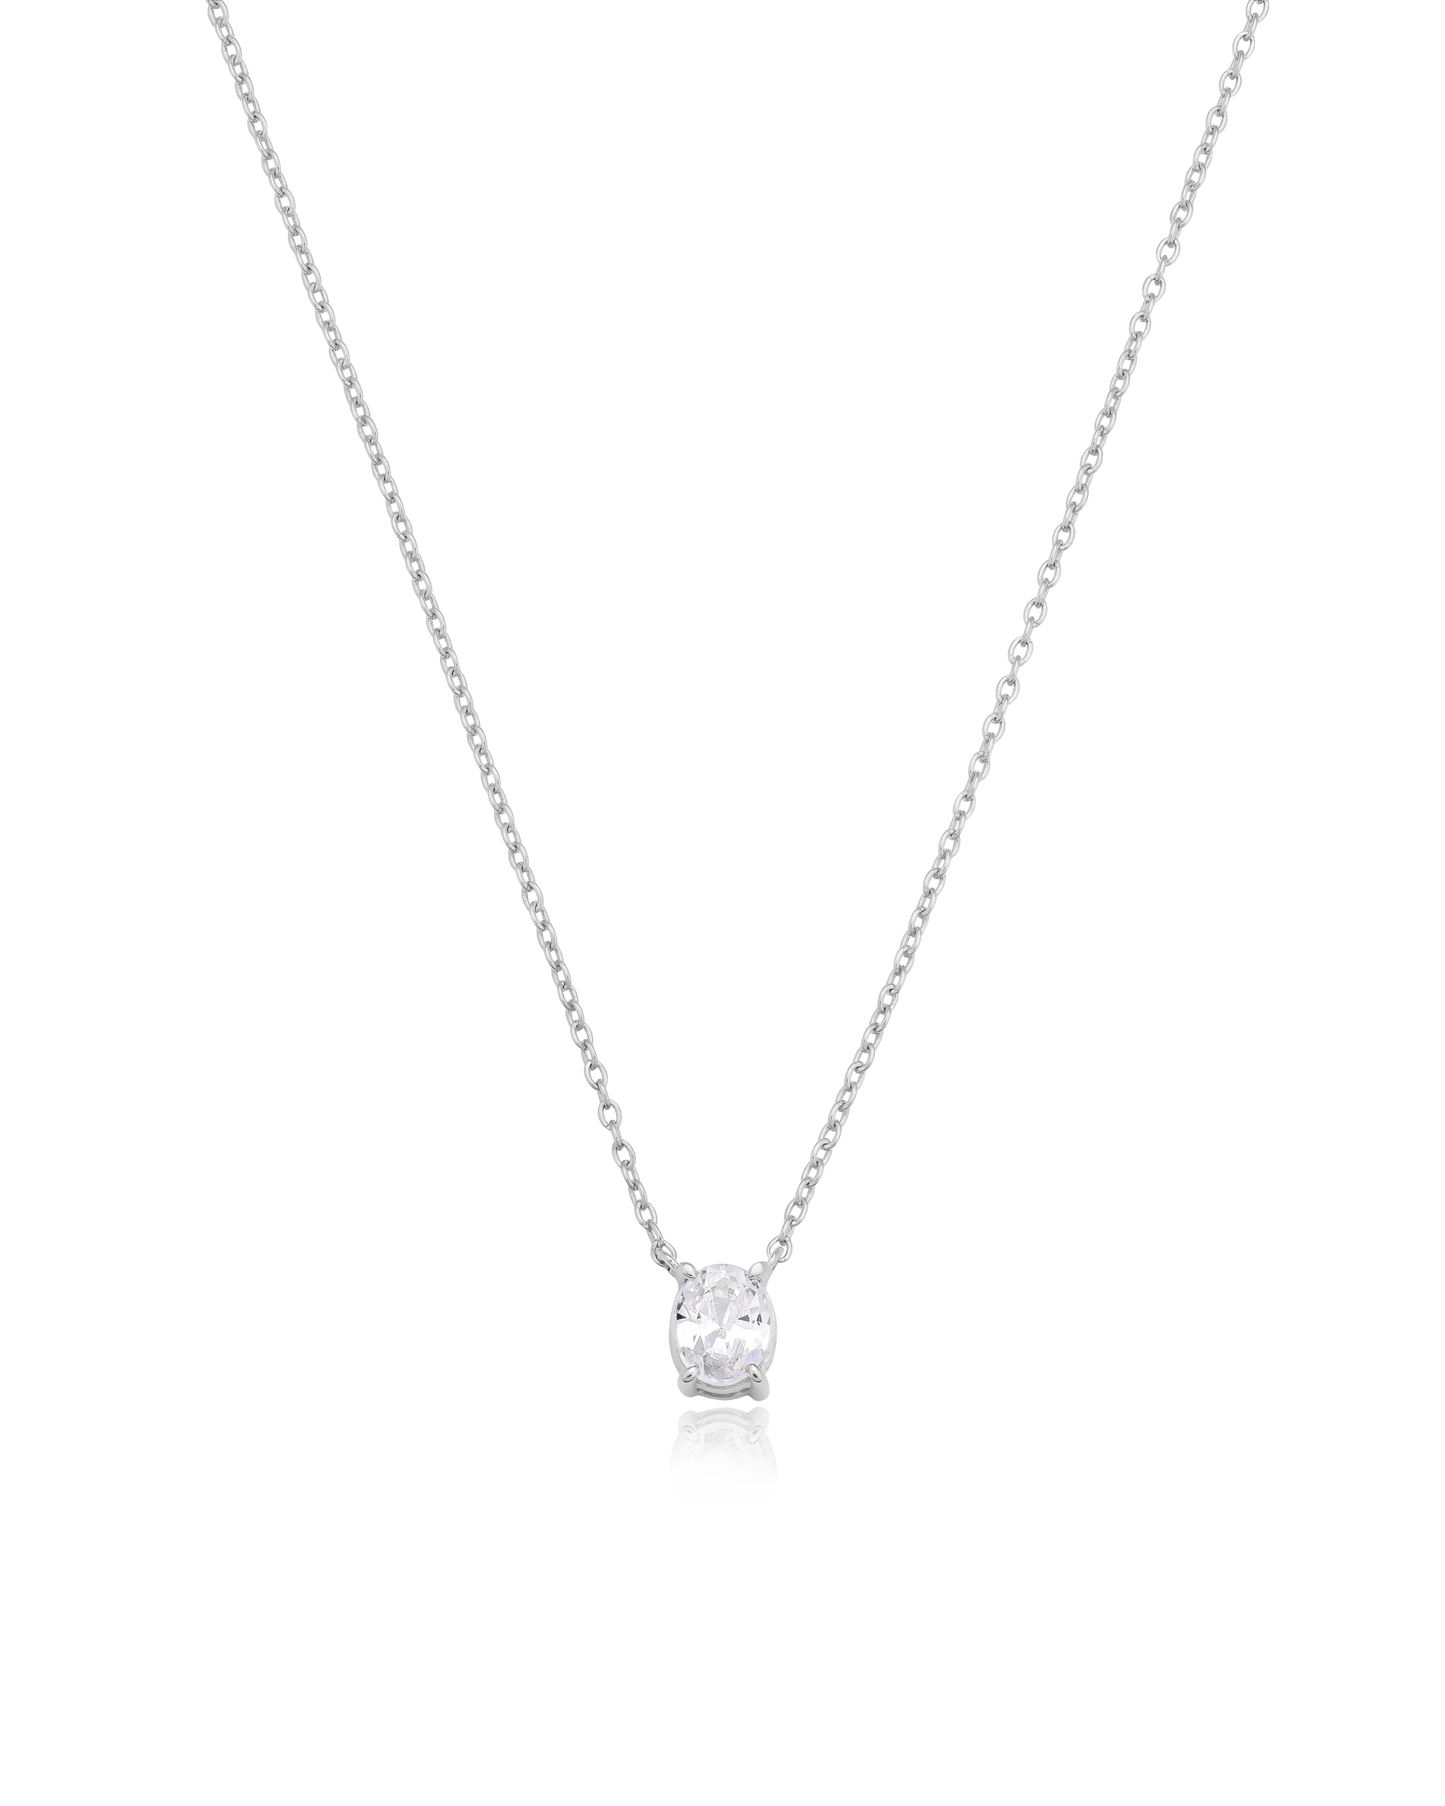 Oval Solitaire Diamond Necklace - 925 Sterling Silver Necklaces magal-dev 0.10 CT 16” 